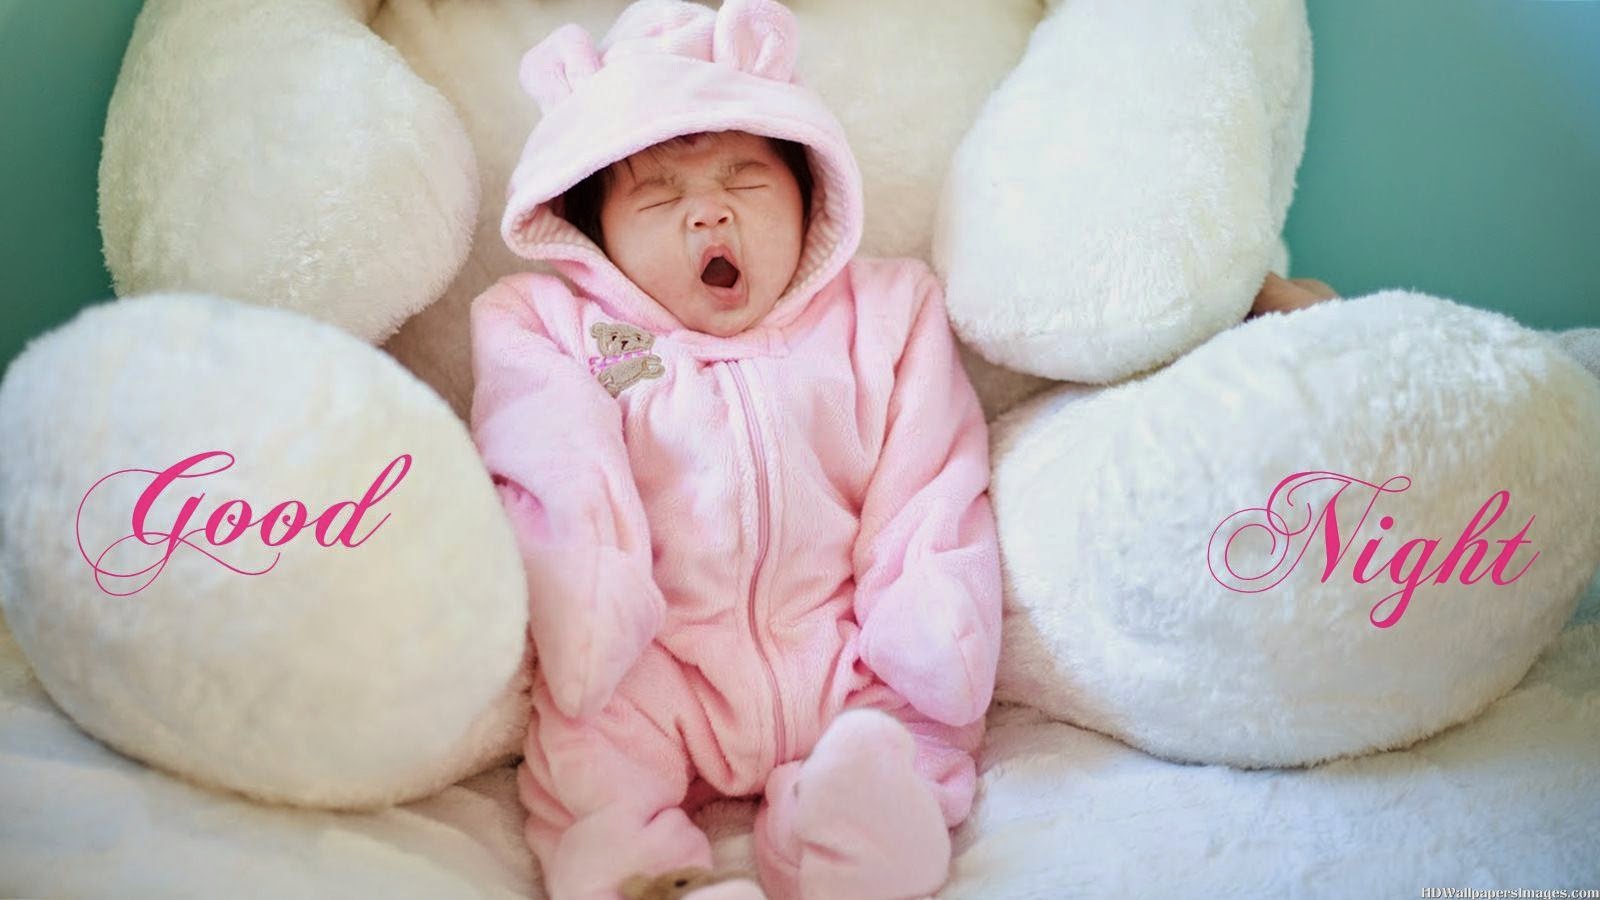 Good Night Baby Hd Wallpaper - Good Night Message With Baby - 1600x900  Wallpaper 